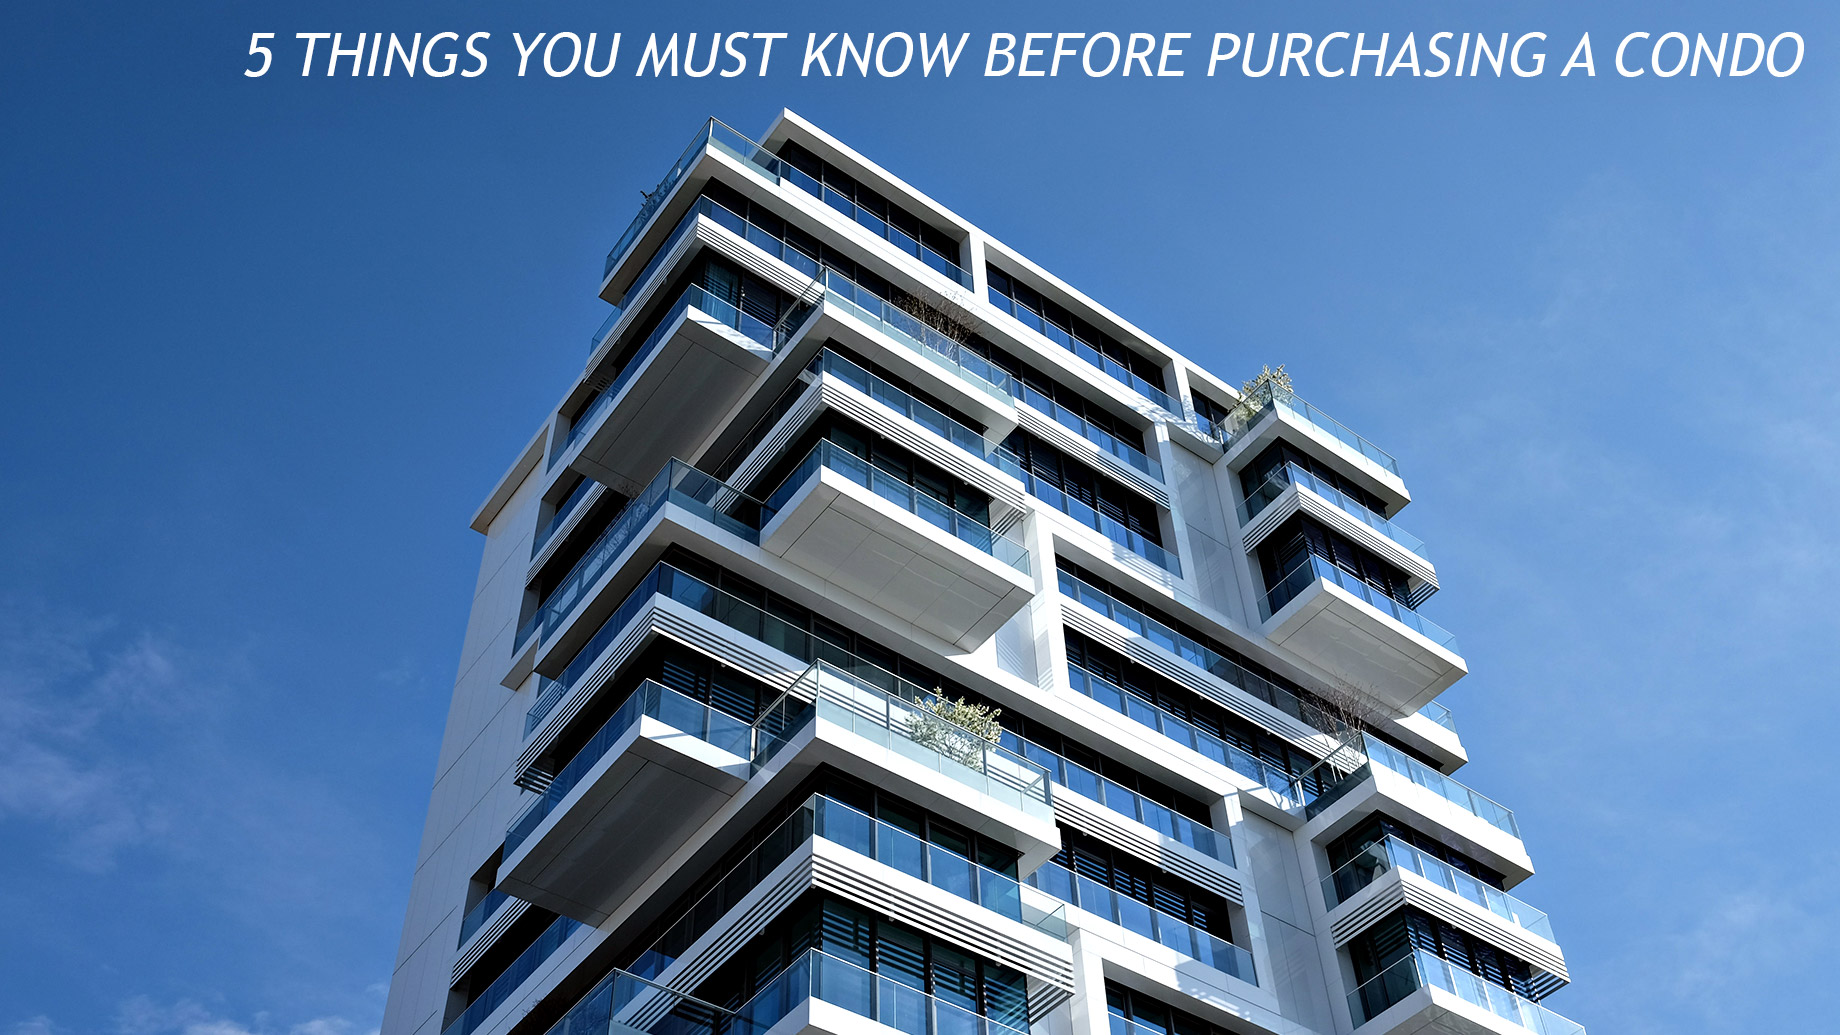 5 Things You Must Know Before Purchasing A Condo